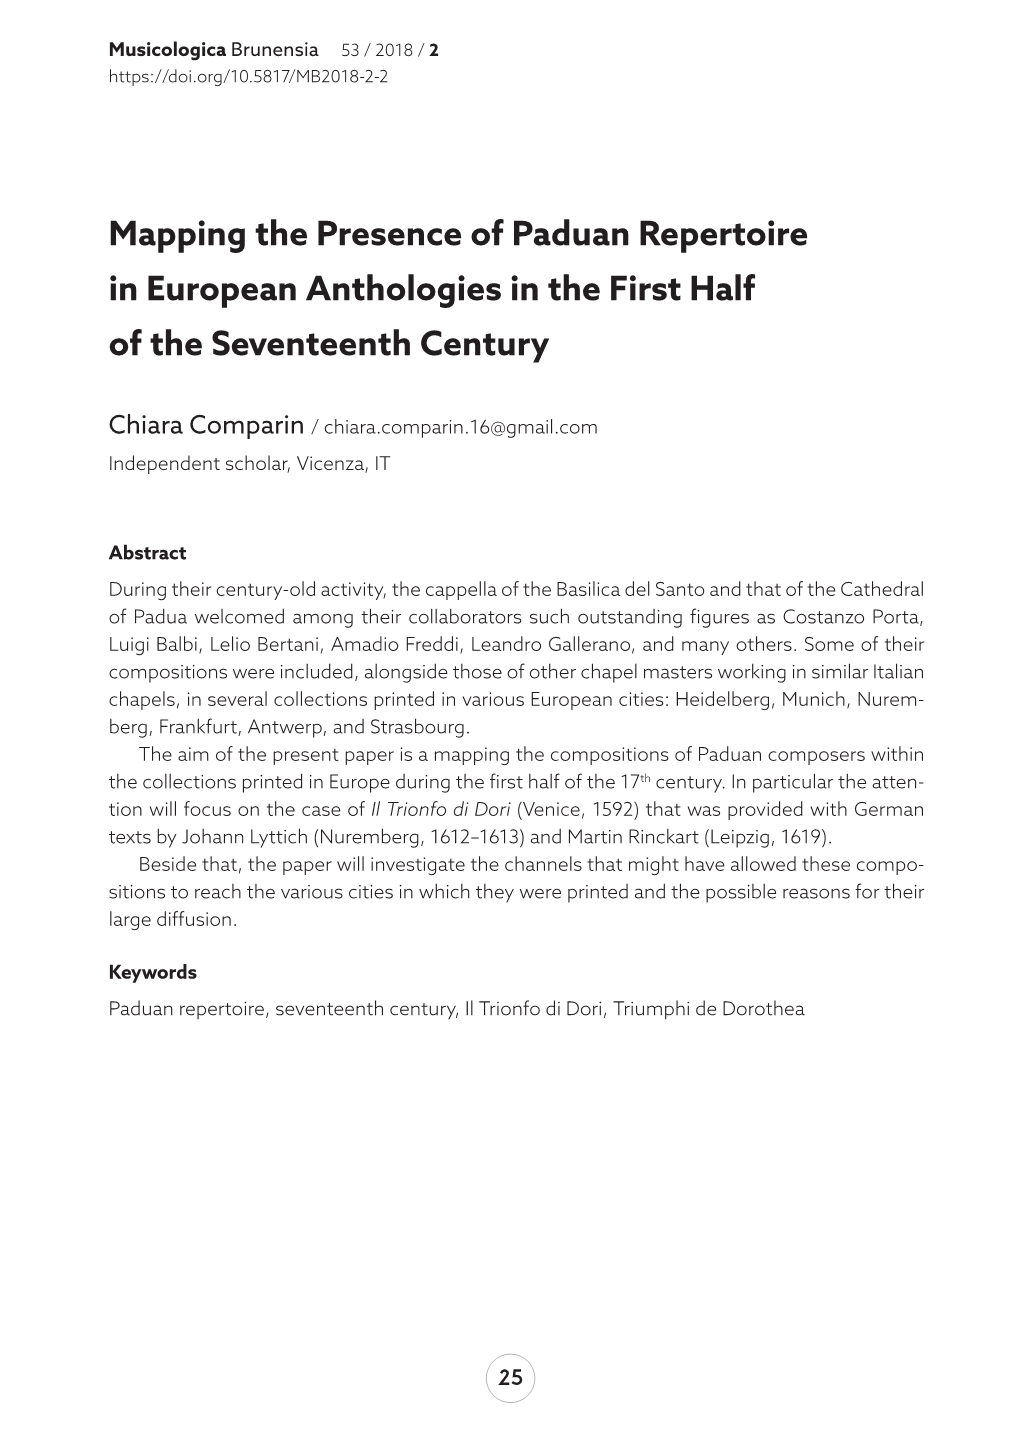 Mapping the Presence of Paduan Repertoire in European Anthologies in the First Half of the Seventeenth Century